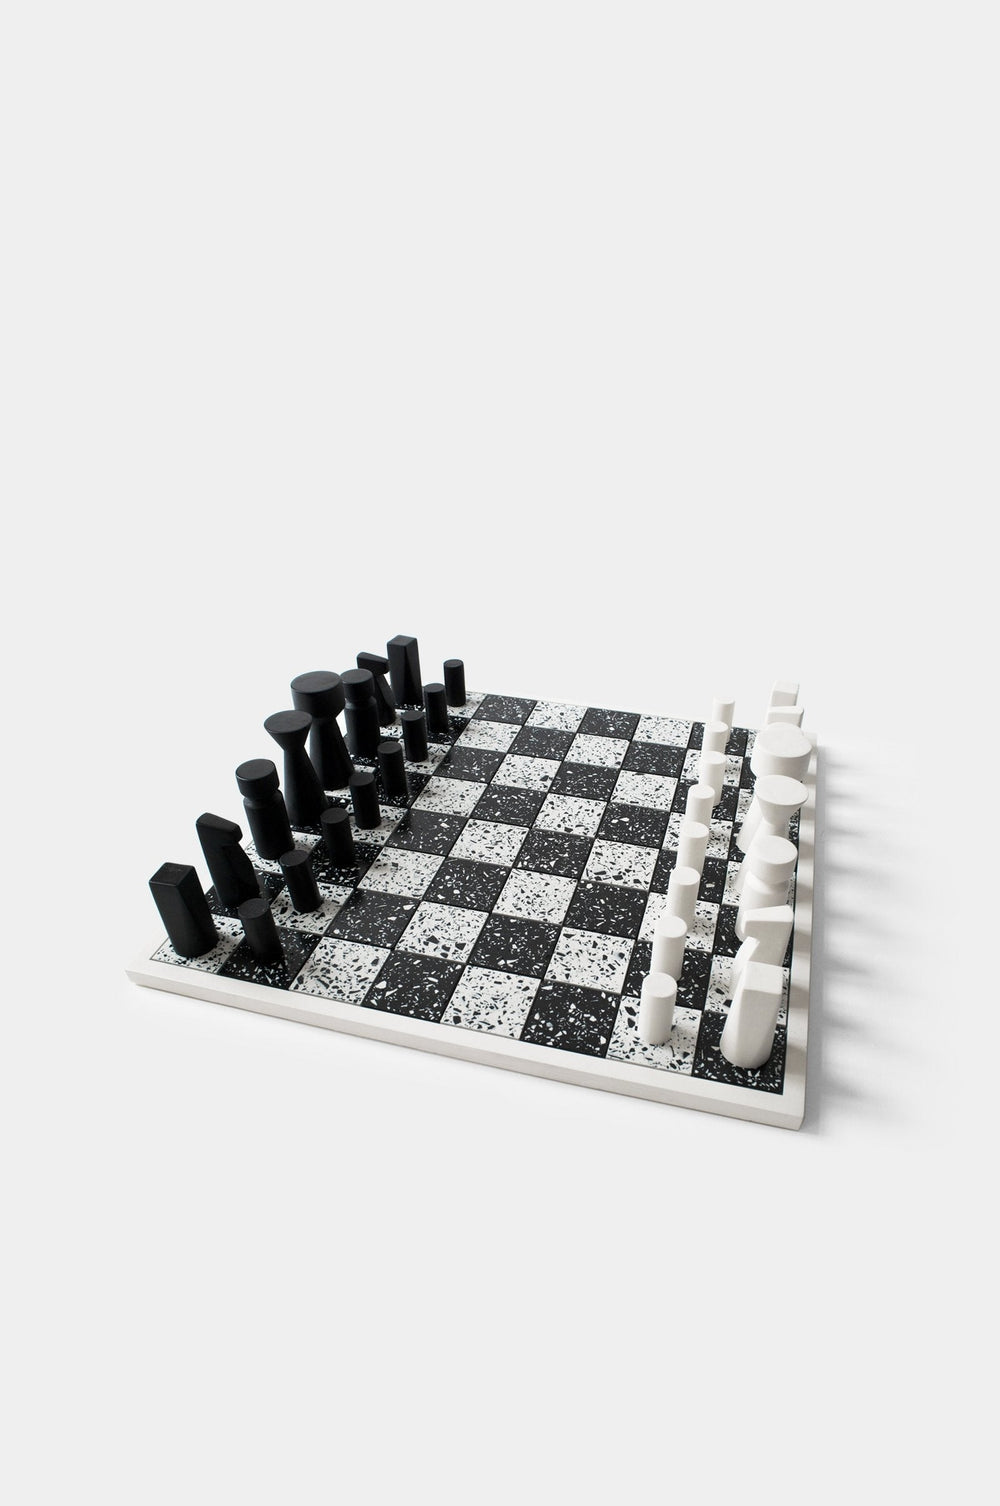 Chess piece - Pawn Board Games House Raccoon 